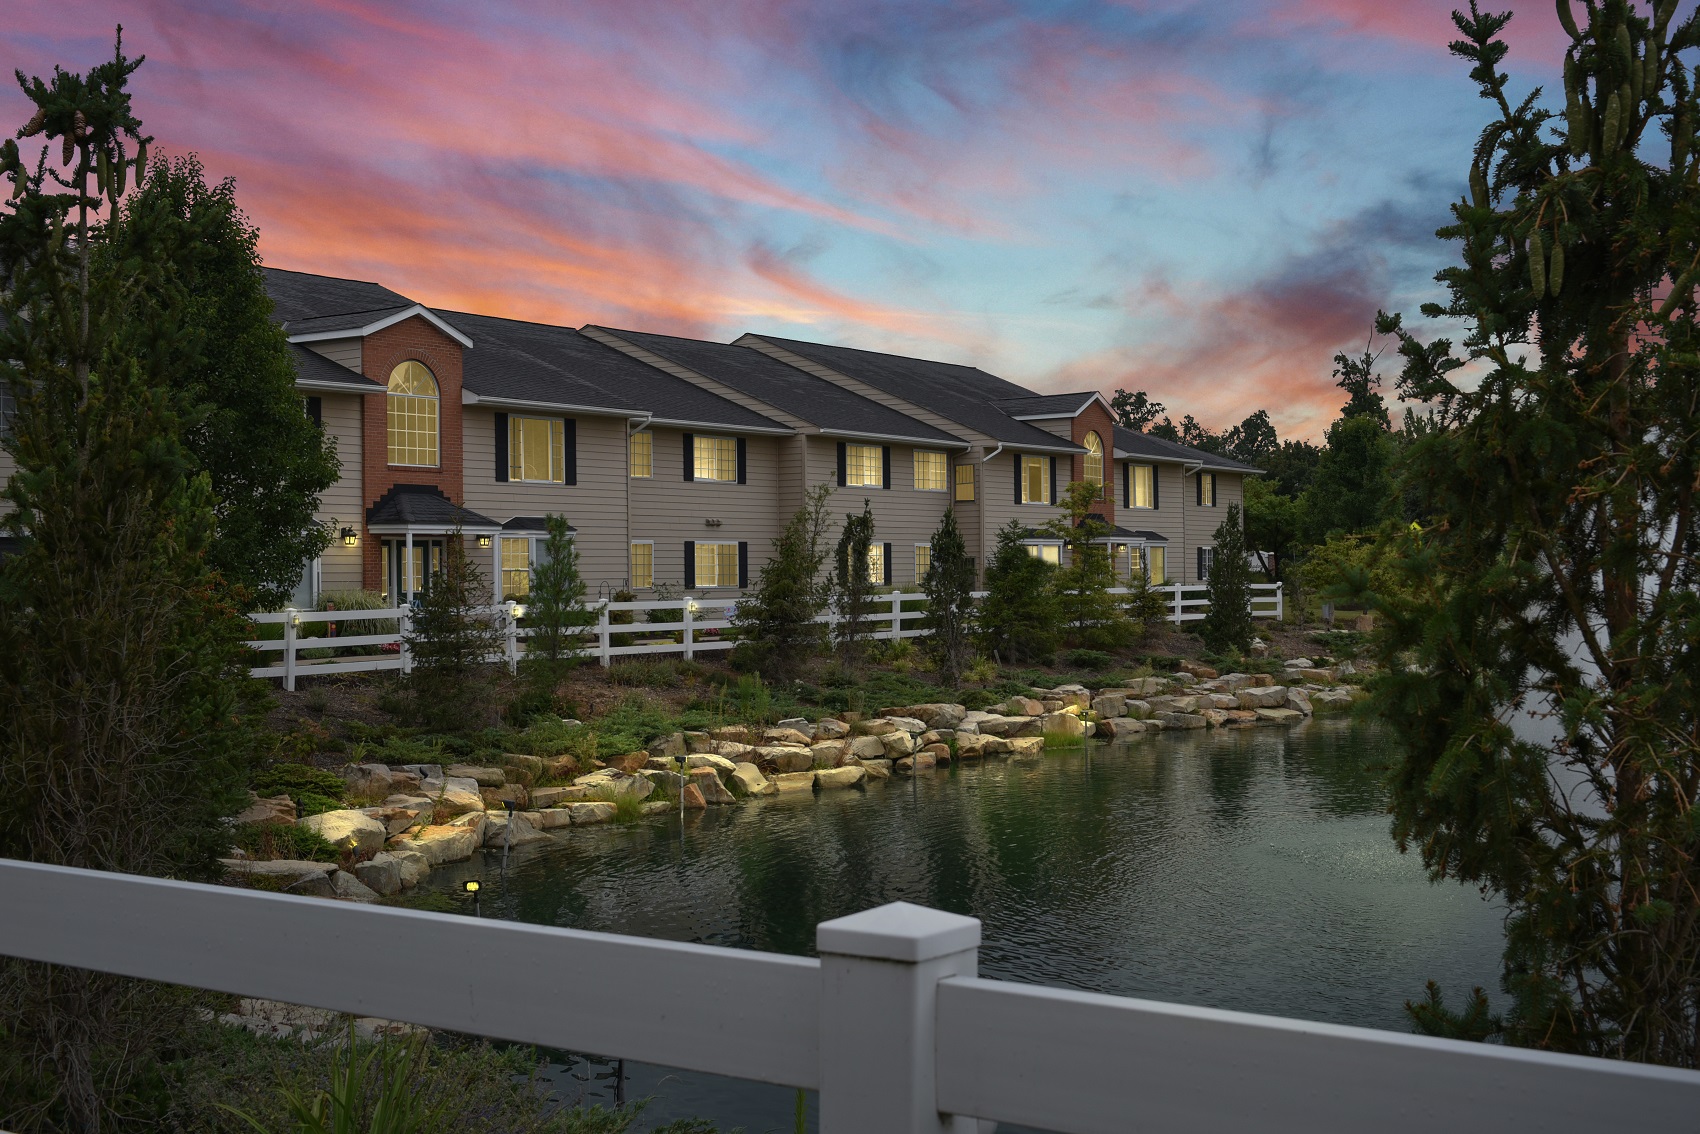 Lakeside Forest Meadows Apartments as Seen at Night